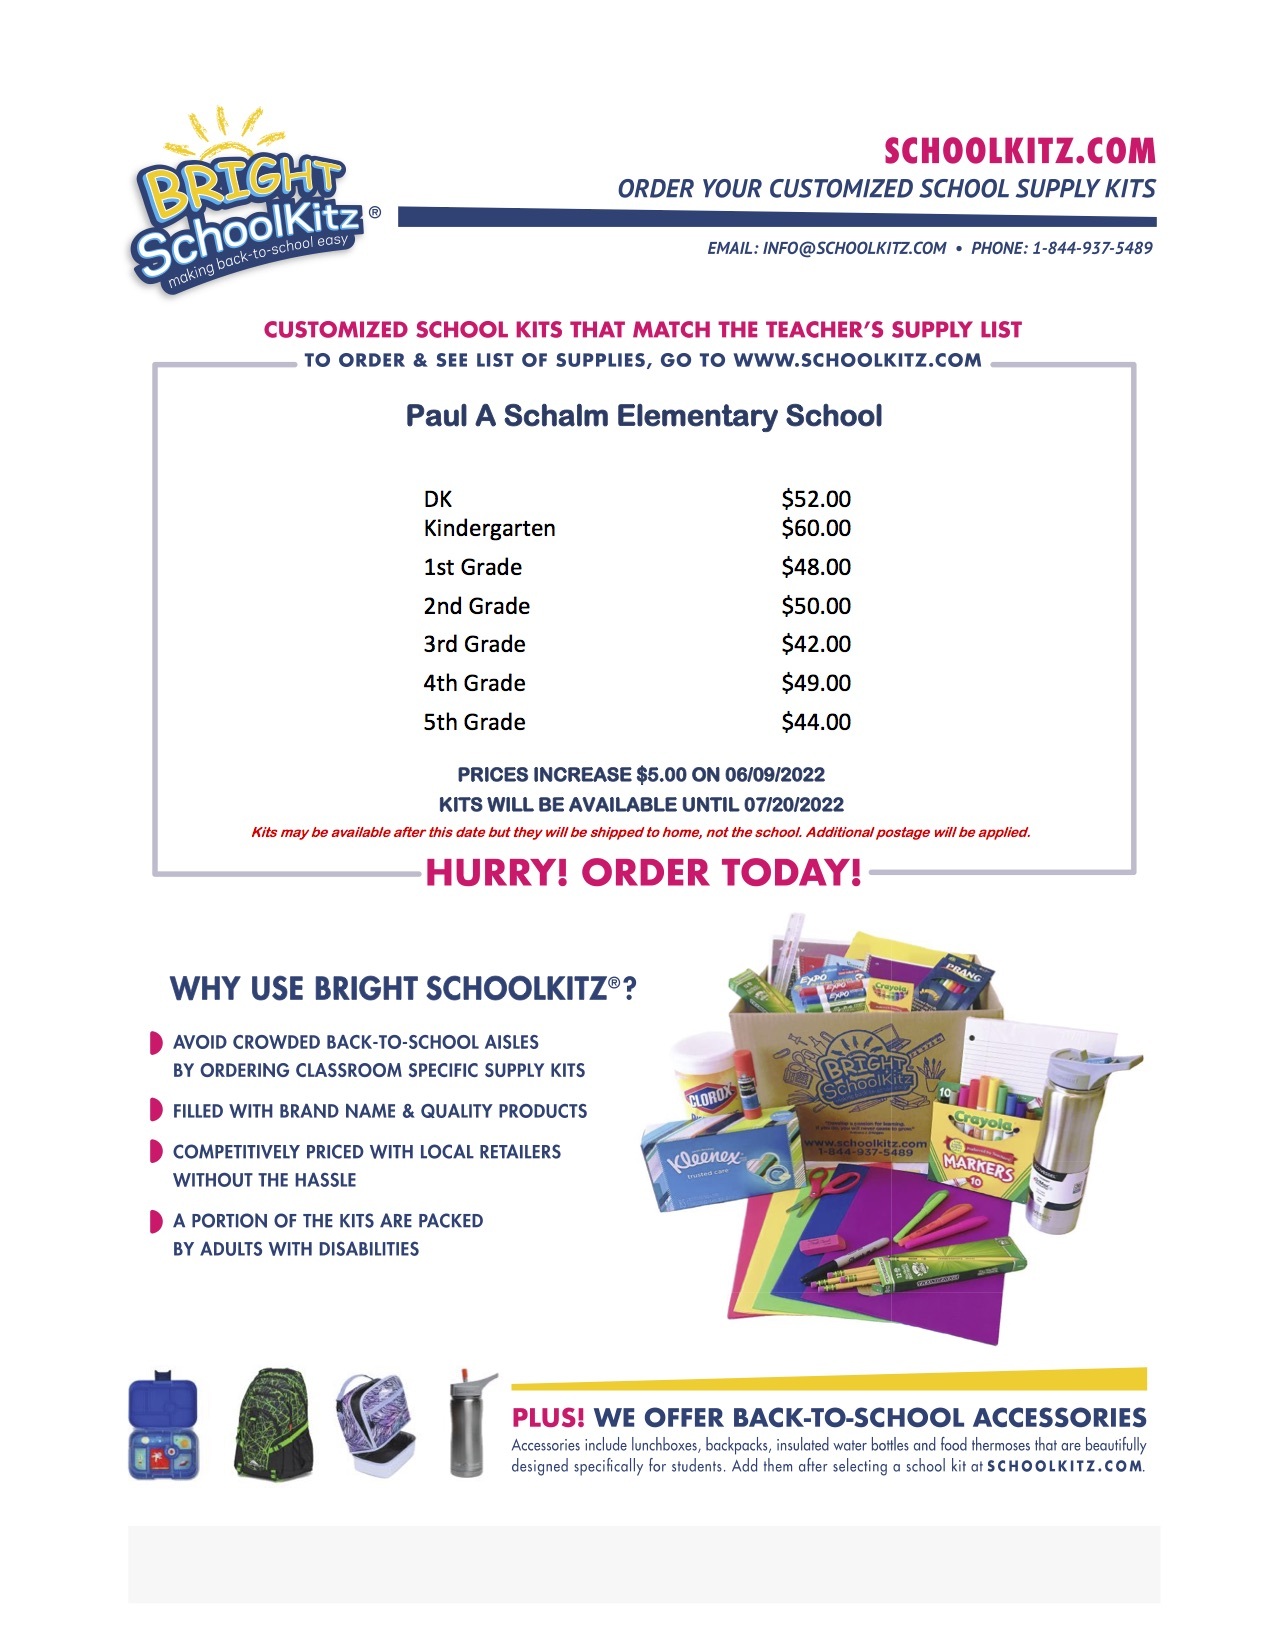 Bright School Kitz - Order Your Customized School Supply Kits. Email: info@schoolkitz.com Phone 1-844-937-5489. Customized School Kits that match the teacher's supply list. To order and see list of supplies, go to www.schoolkitz.com. Paul A Schalm Elementary School. DK Kindergarten 1st Grade 2nd Grade 3rd Grade 4th Grade 5th Grade $52.00 $60.00 $48.00 $50.00 $42.00 $49.00 $44.00 PRICES INCREASE $5.00 ON 06/09/2022 KITS WILL BE AVAILABLE UNTIL 07/20/2022